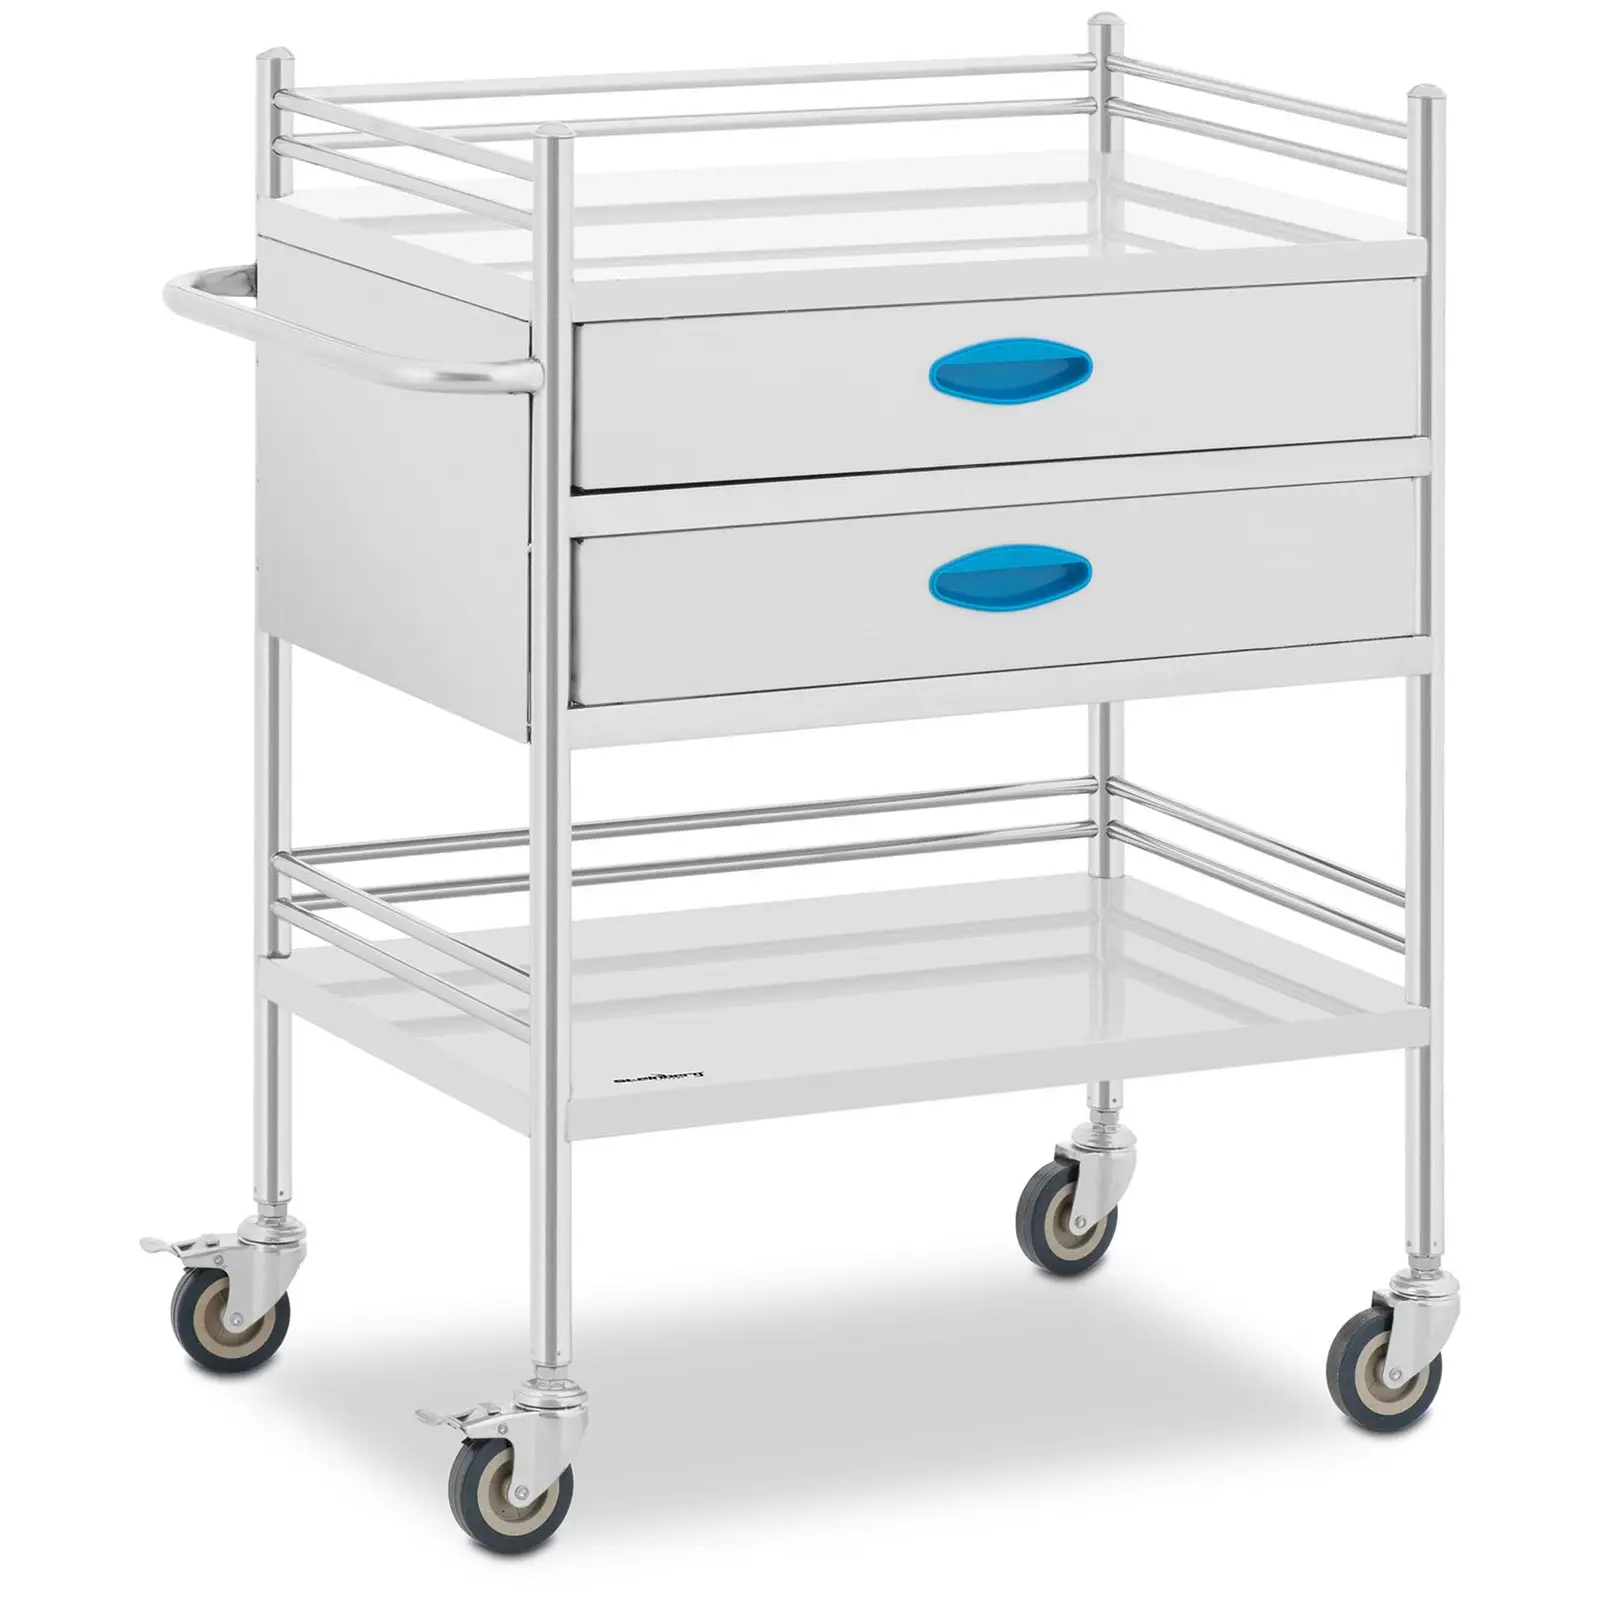 Laboratory Trolley - stainless steel - 2 shelves each 60 x 41 x 28 cm - 2 drawers - 40 kg